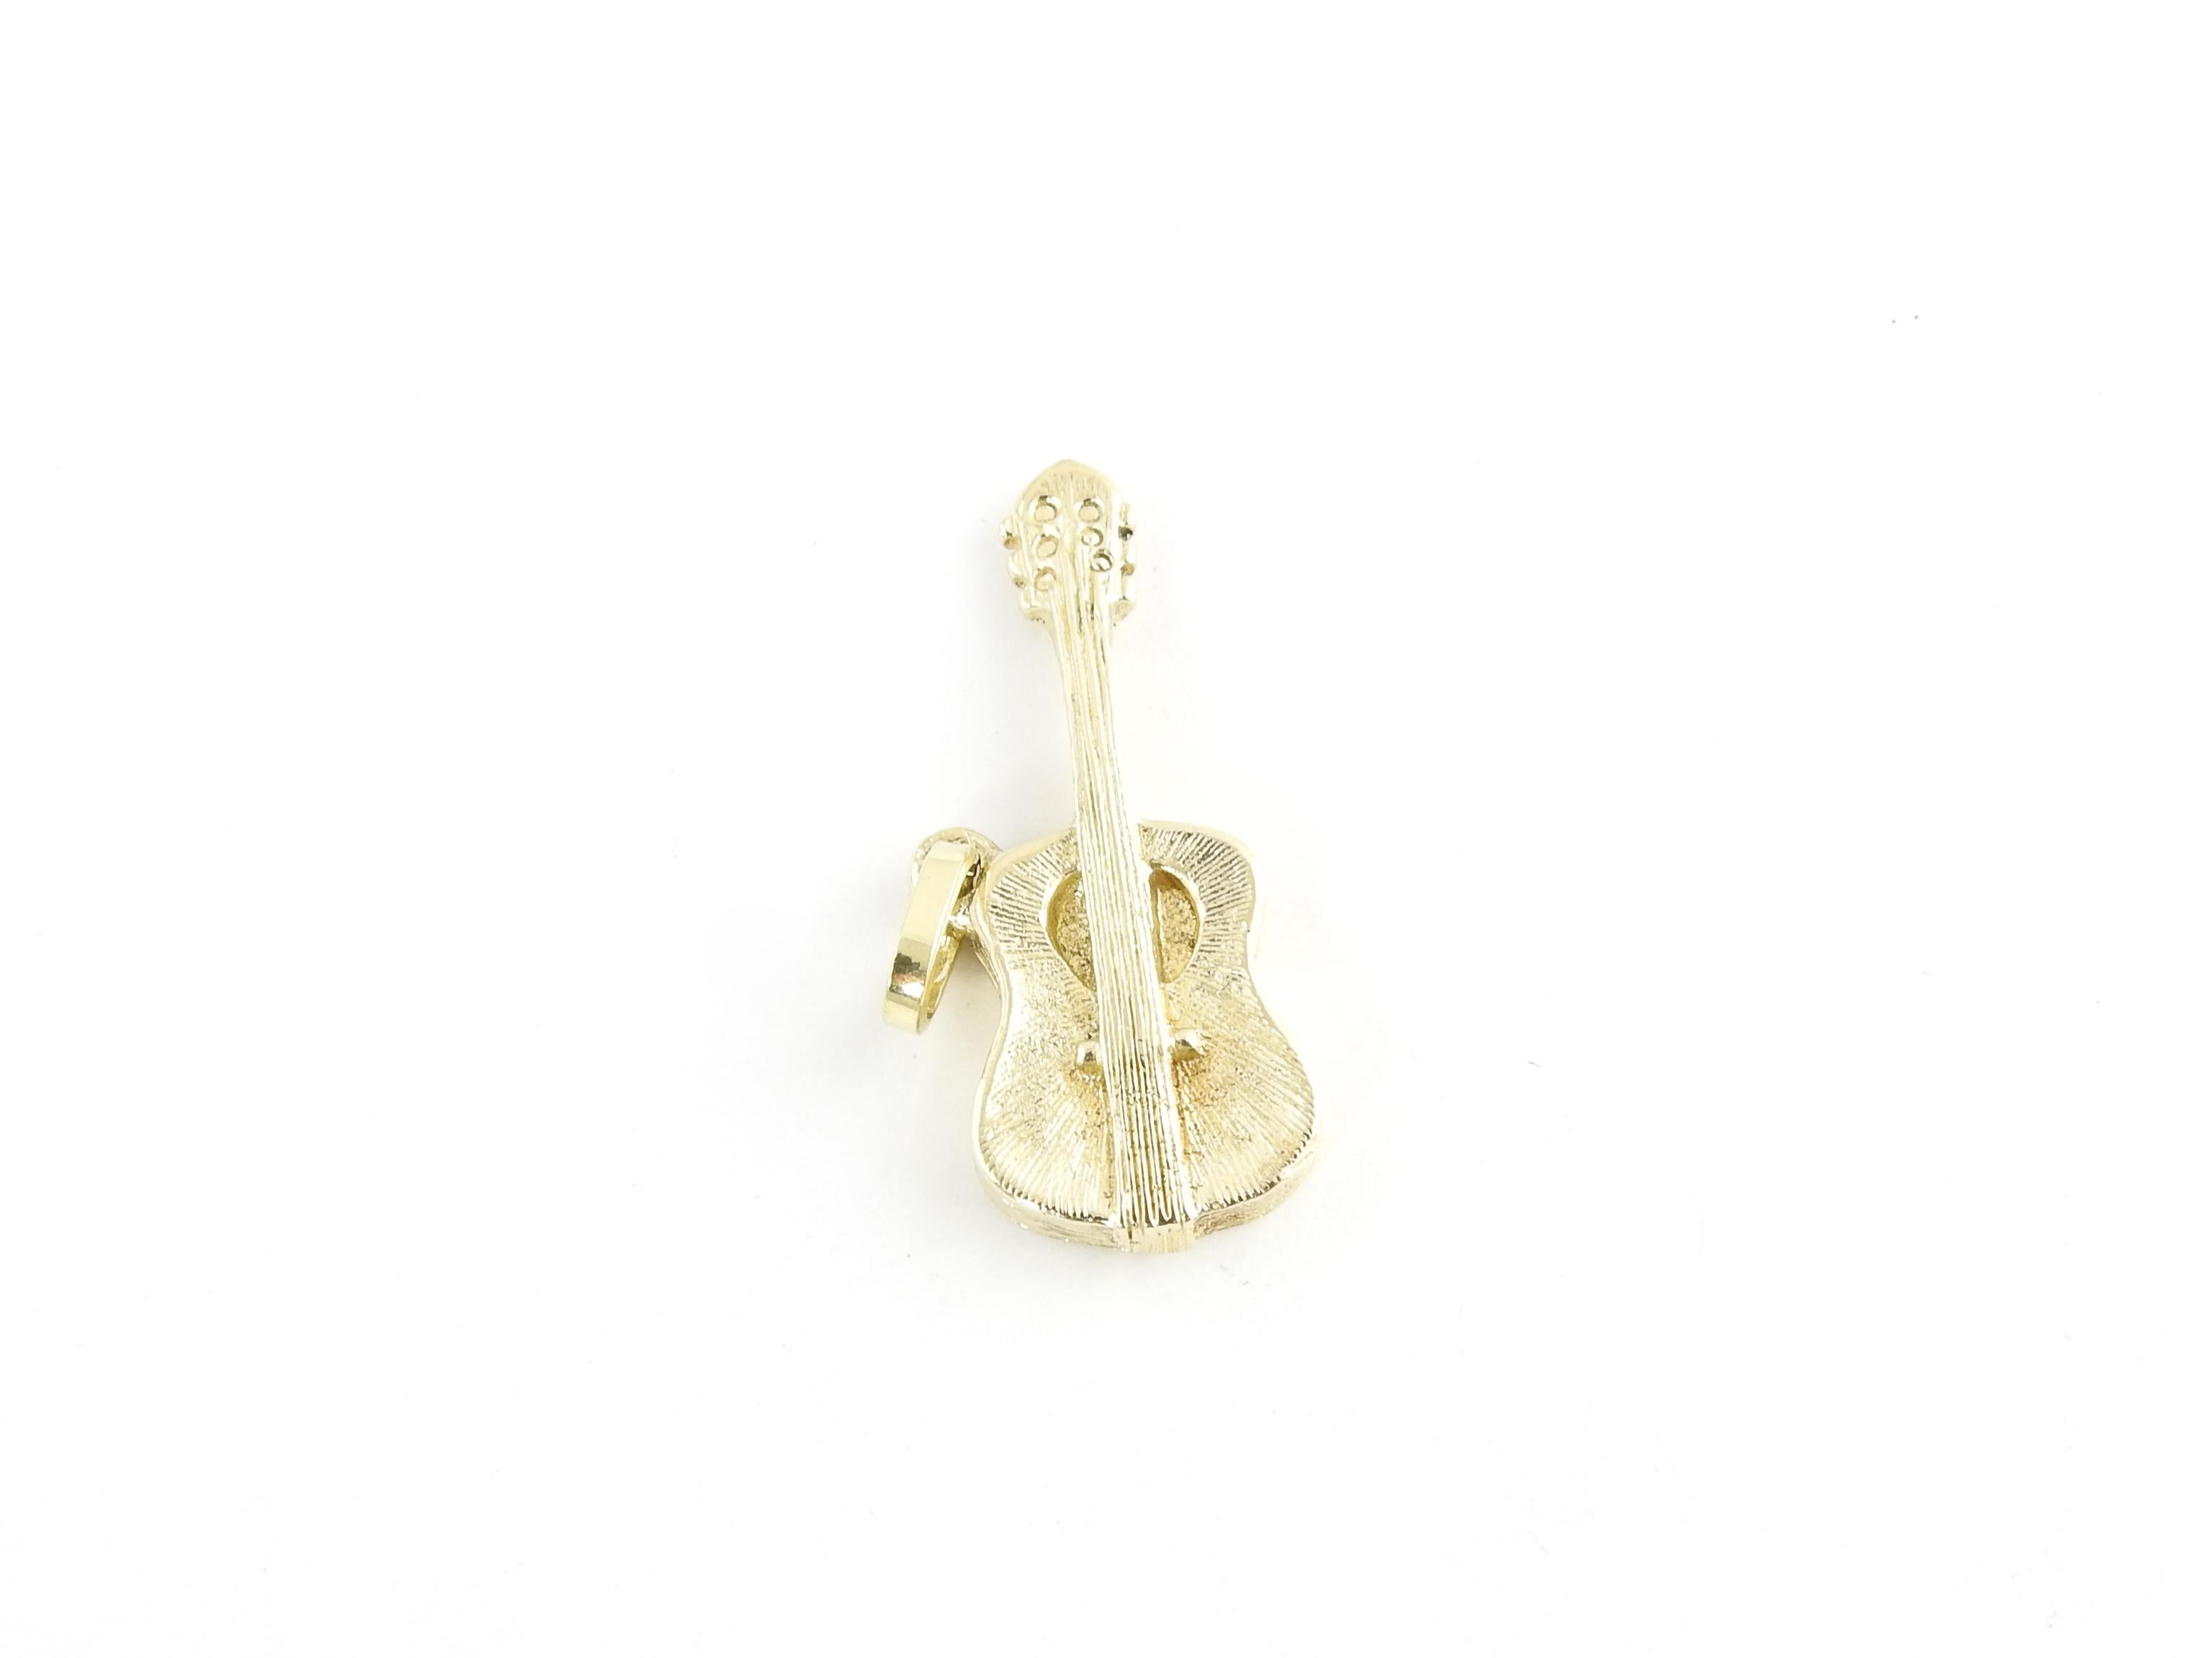 Vintage 14 Karat Yellow Gold Guitar Charm

Perfect for the musician in your life!

This lovely 3D charm features a miniature guitar beautifully detailed in 14K yellow gold.

Size: 28 mm x 11 mm (actual charm)

Weight: 3.2 dwt. / 5.1 gr.

Acid tested